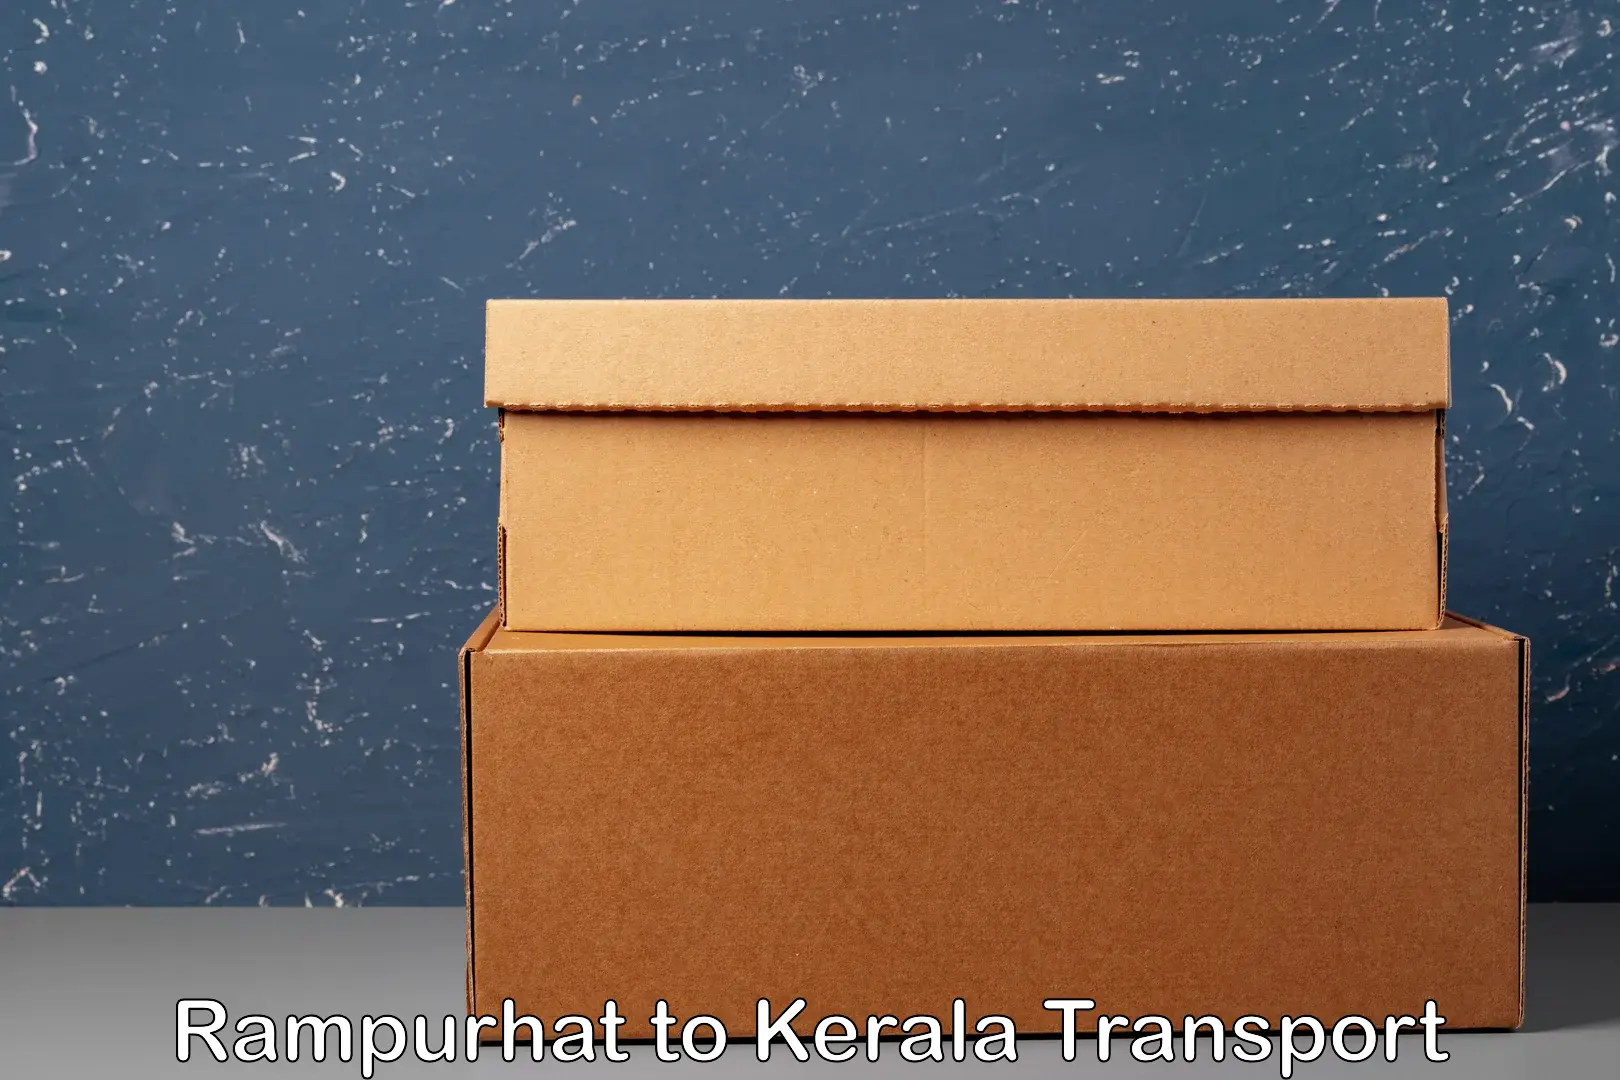 Transport bike from one state to another in Rampurhat to Kerala